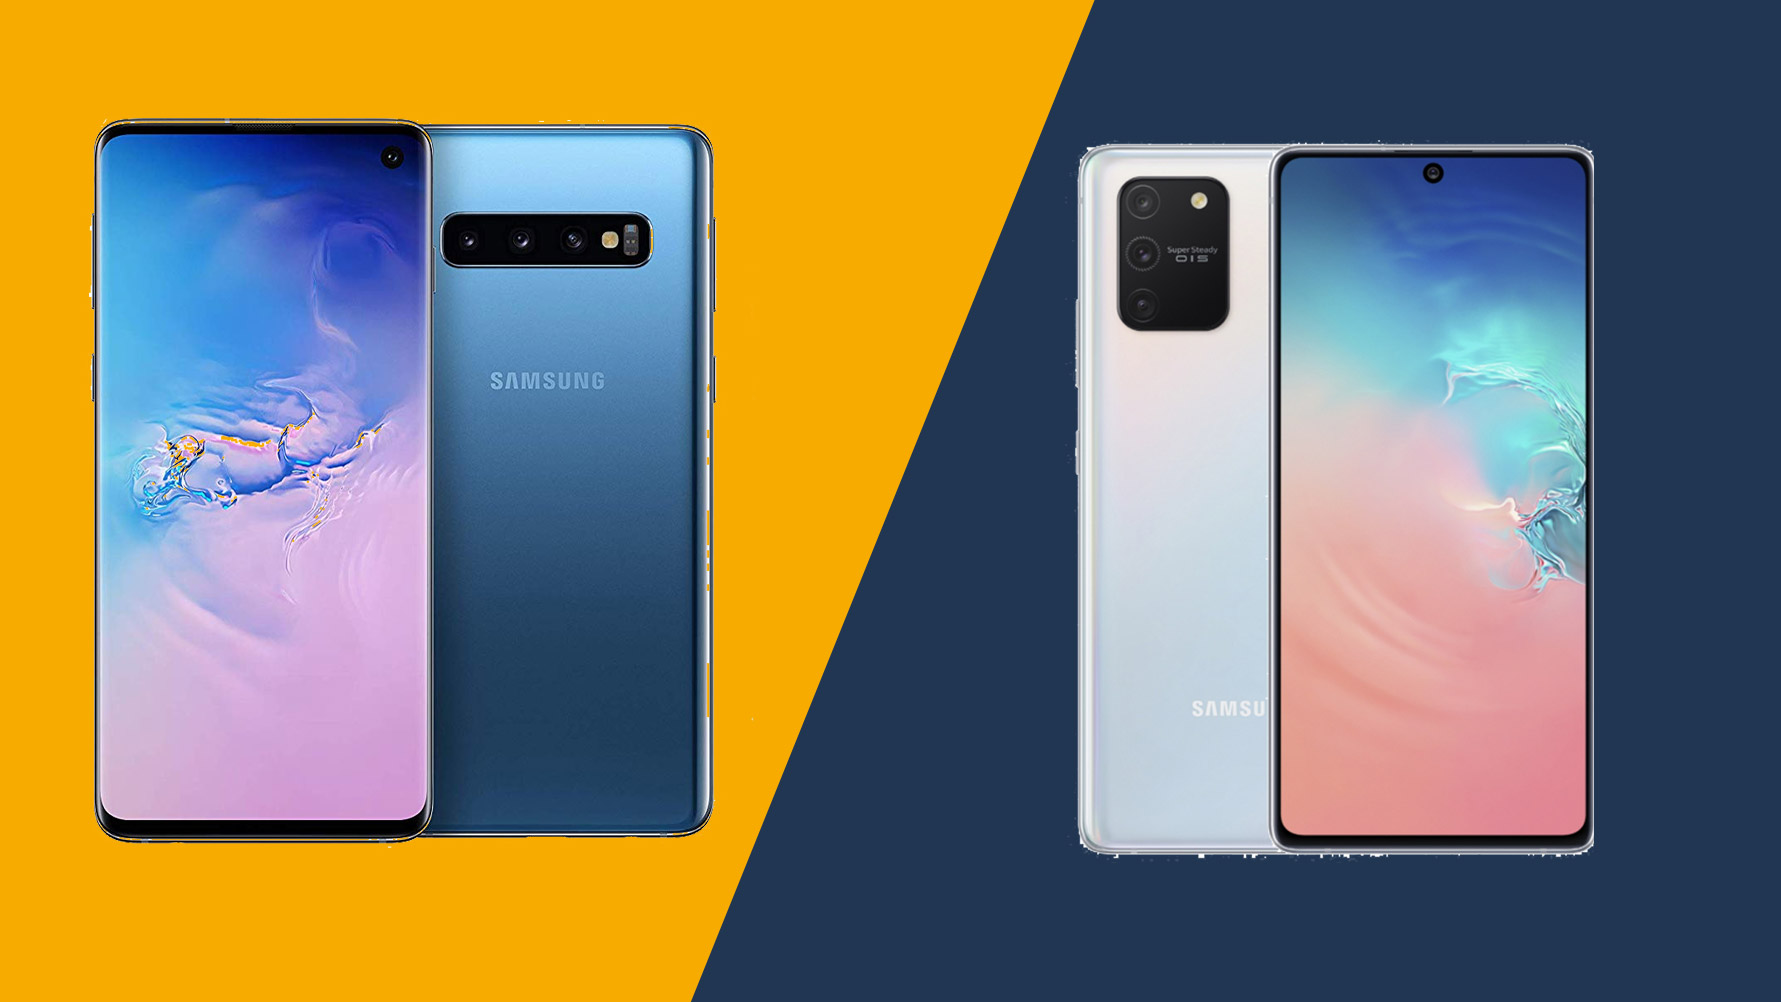 Samsung Galaxy S10 Lite vs Galaxy S10 what’s changed for the cheaper